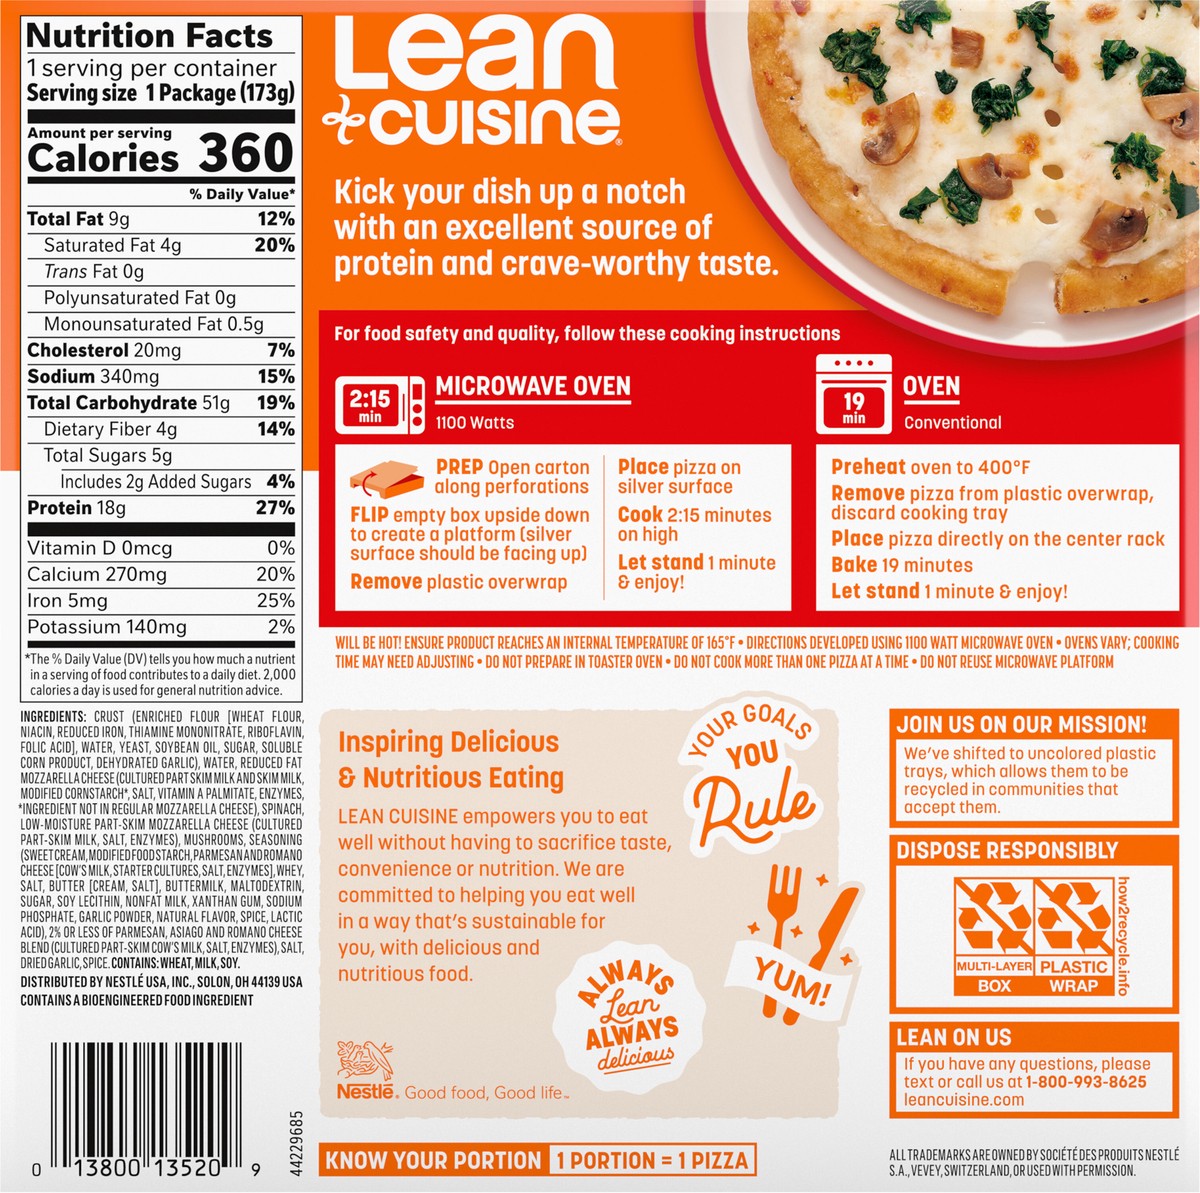 slide 6 of 14, Lean Cuisine Frozen Meal Spinach and Mushroom Frozen Pizza, Protein Kick Microwave Meal, Microwave Pizza Dinner, Frozen Dinner for One, 6.12 oz